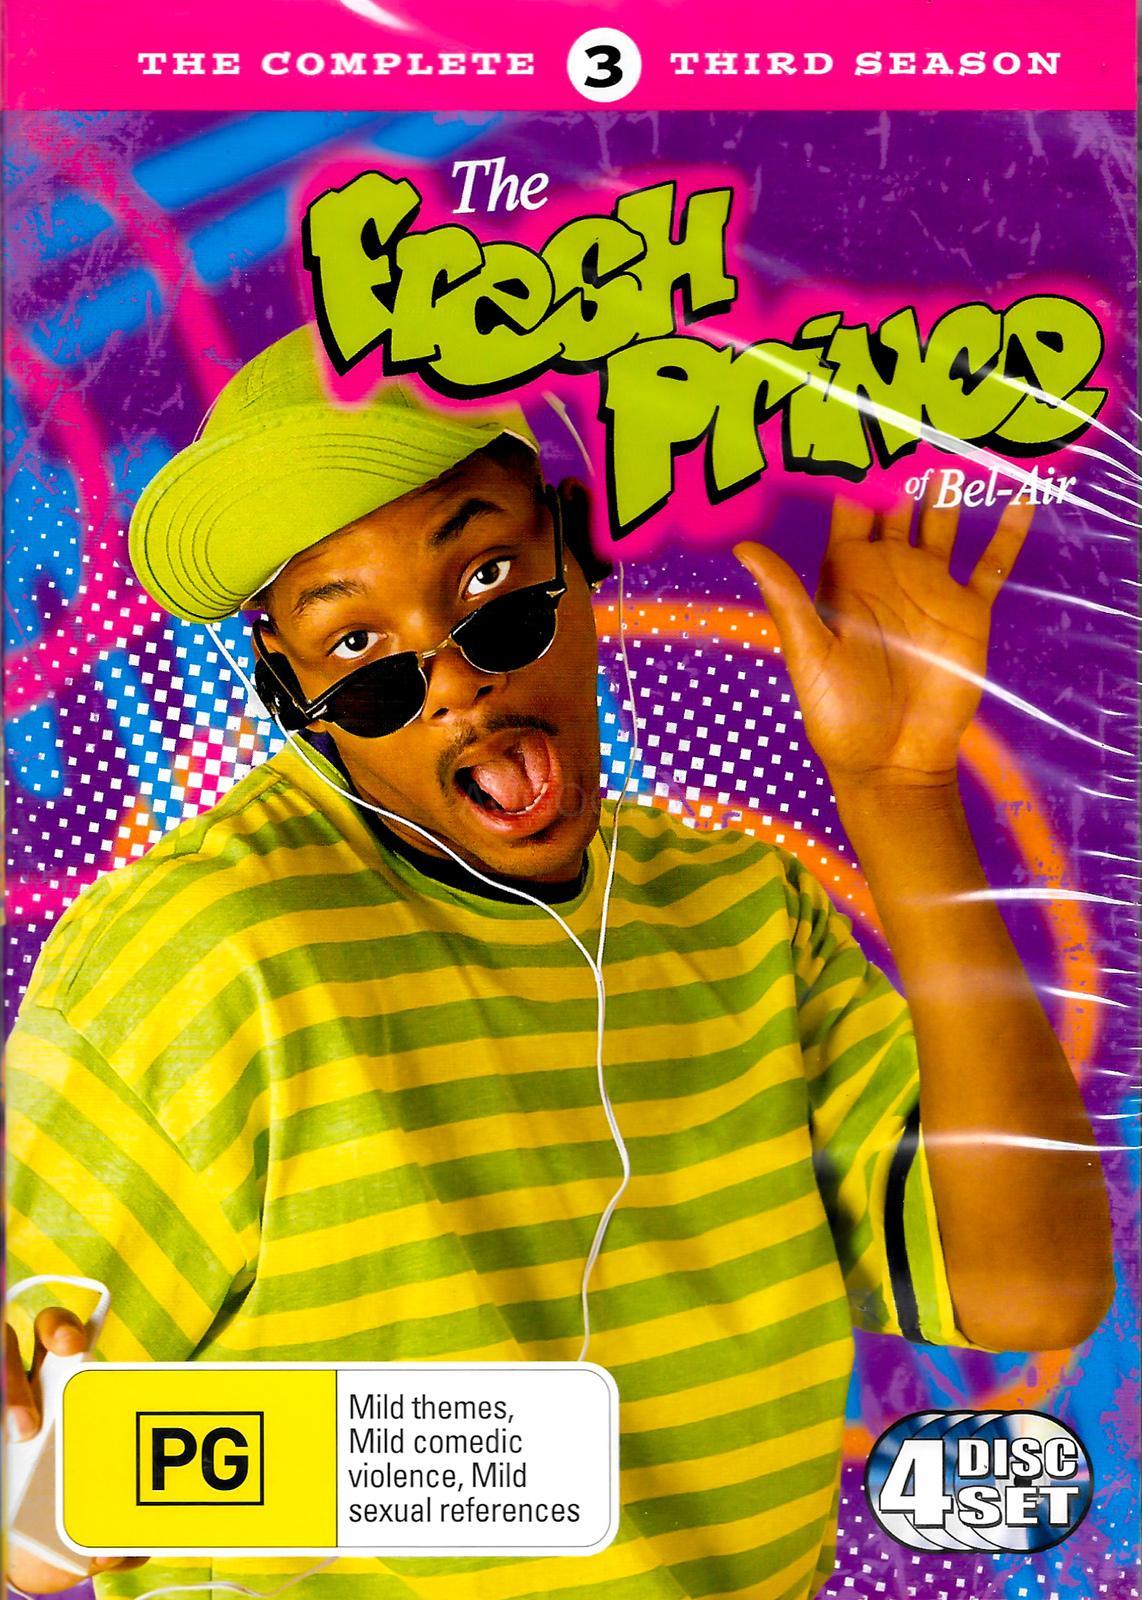 THE FRESH PRINCE OF BEL-AIR - THE COMPLETE THIRD SEASON -DVD Series Comedy New